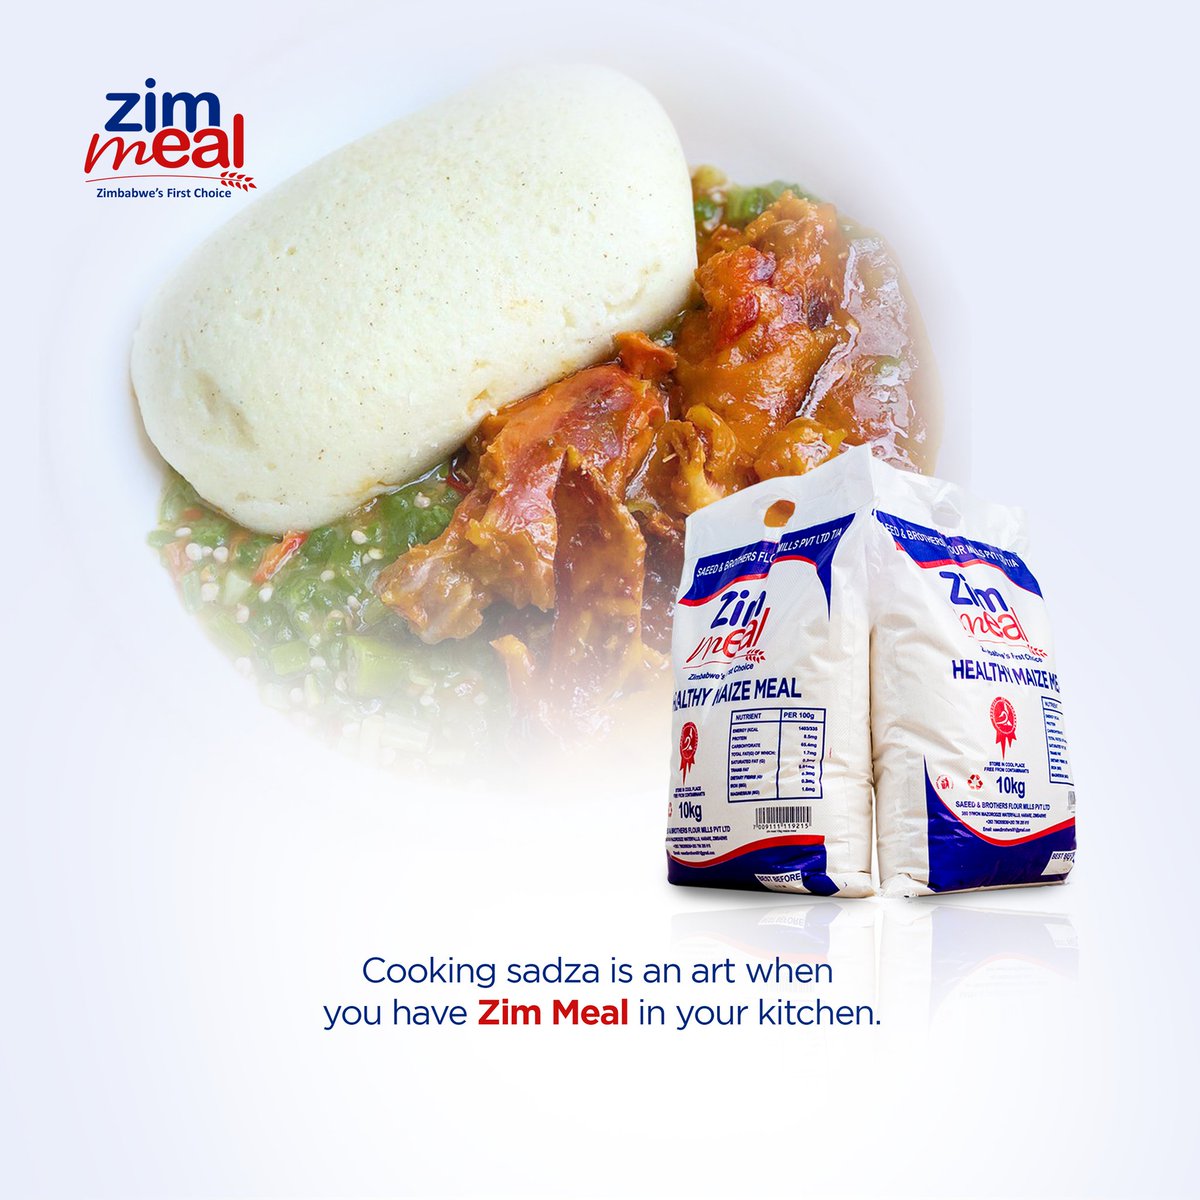 Be artistic in the place where memories are homemade and seasoned with love with Zim Meal.

#food #healthyfood #nutrition #diet #maize #dinner #supper #sadza #sadzaeaters #satisfying #energy #power #whitecorn #zimbabweanfood